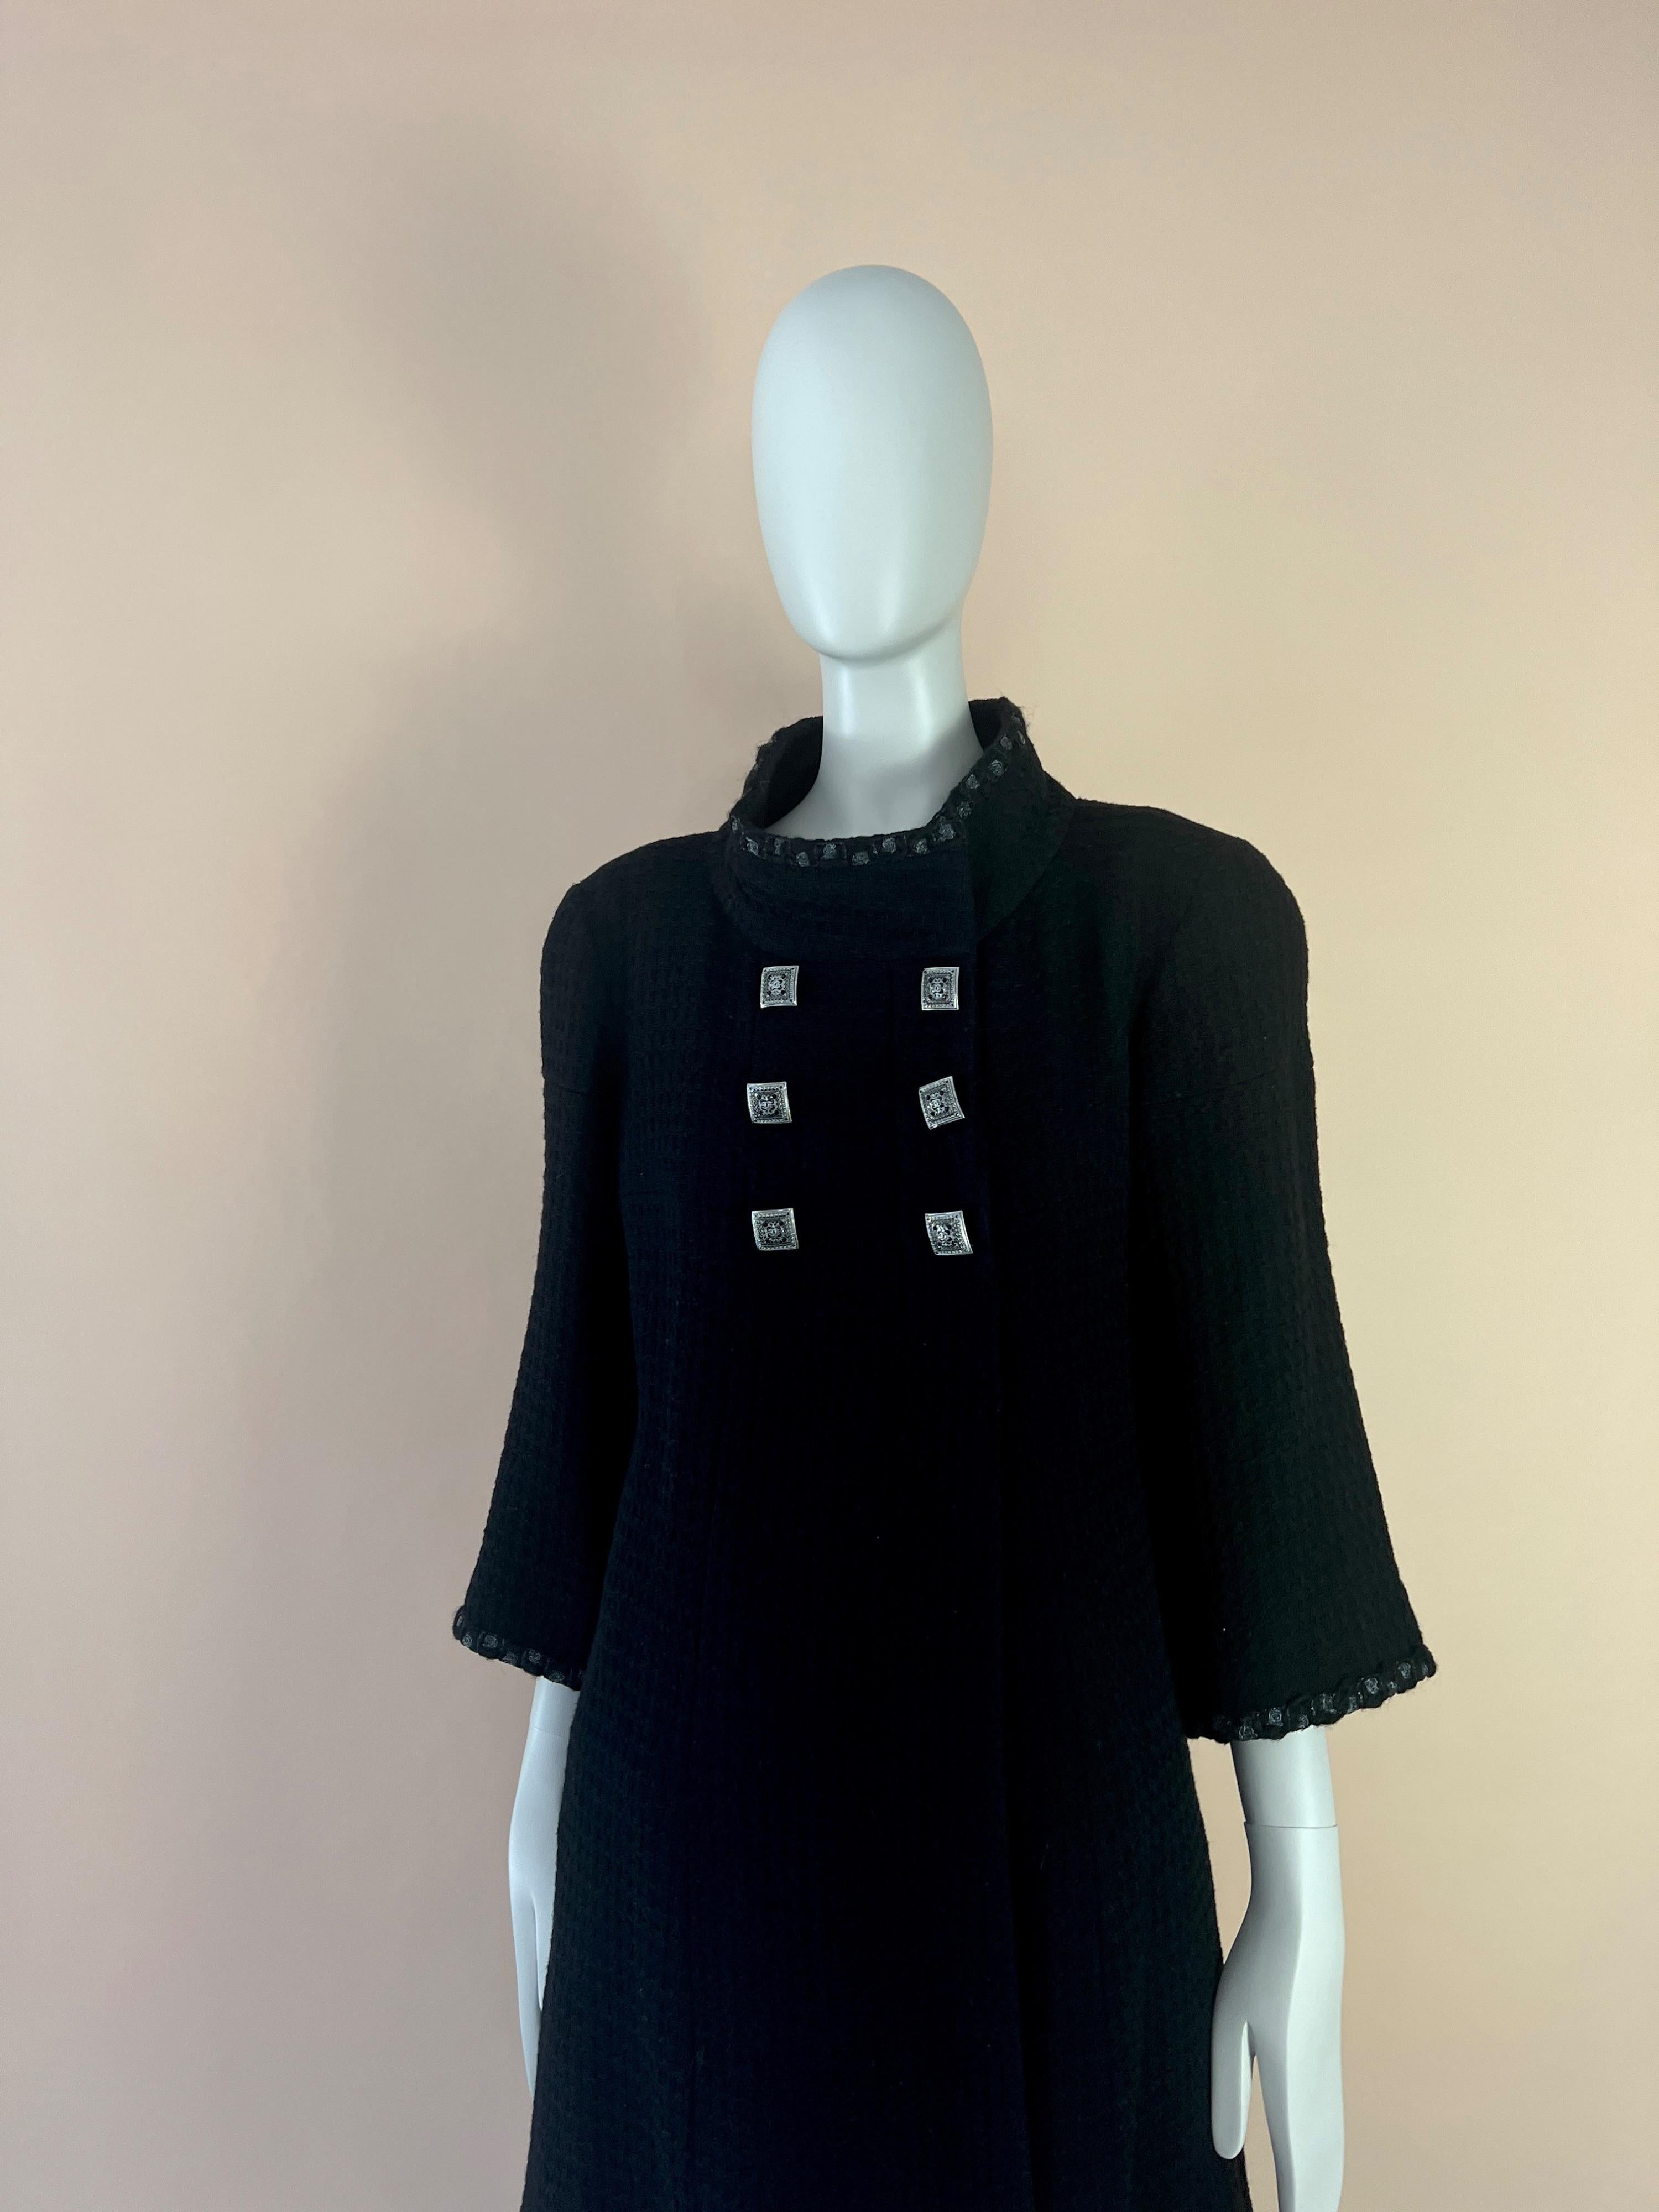 Chanel Byzance Collection Jewel Buttons Tweed Coat 1